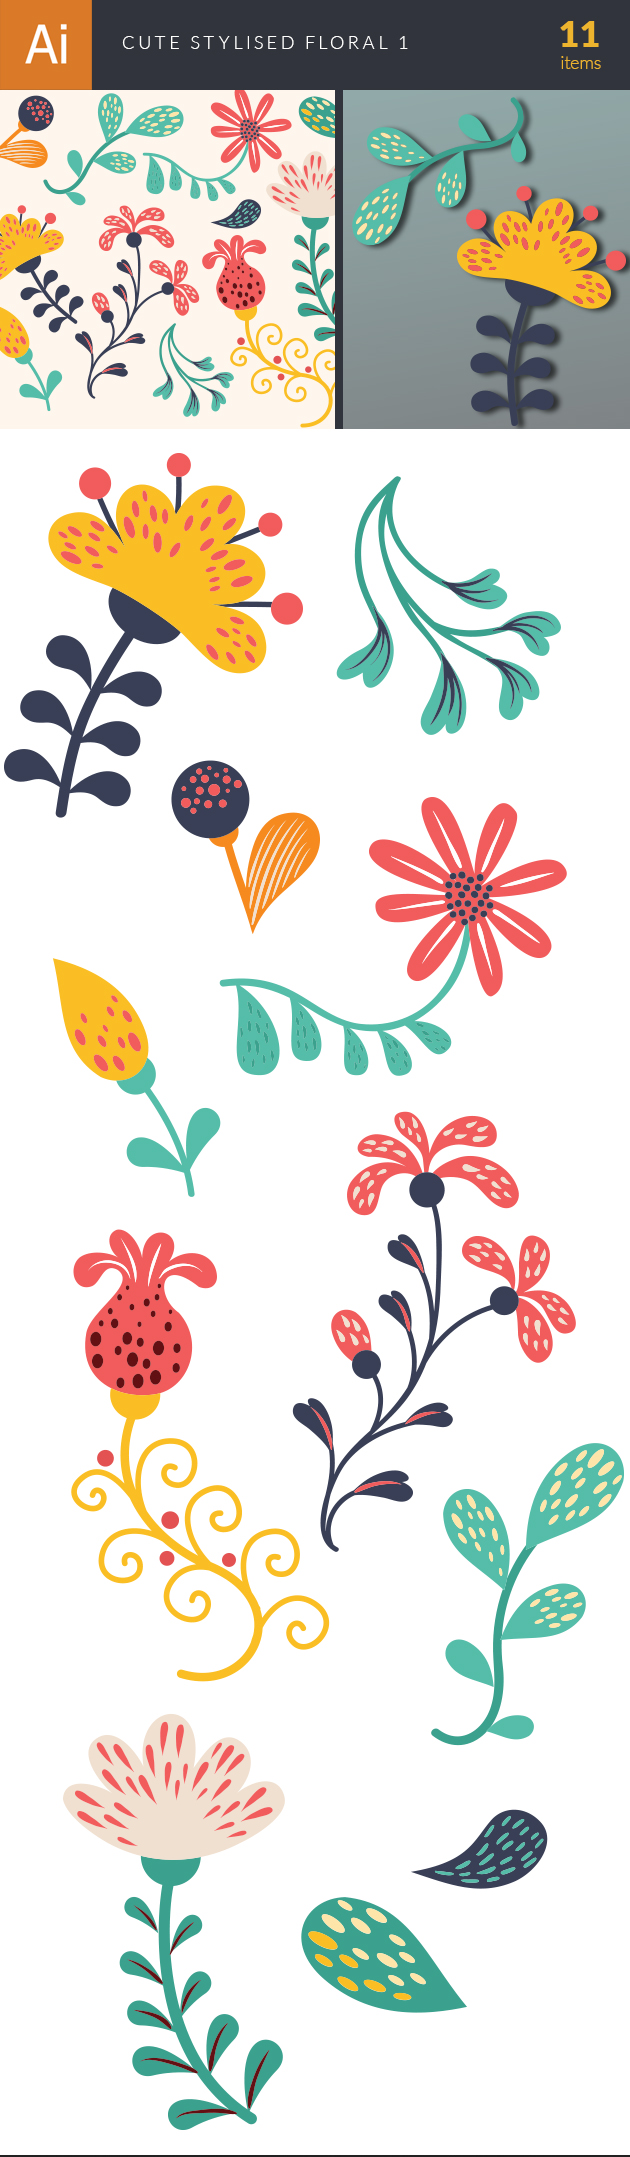 Cute Stylized Floral Vector Set 1 2